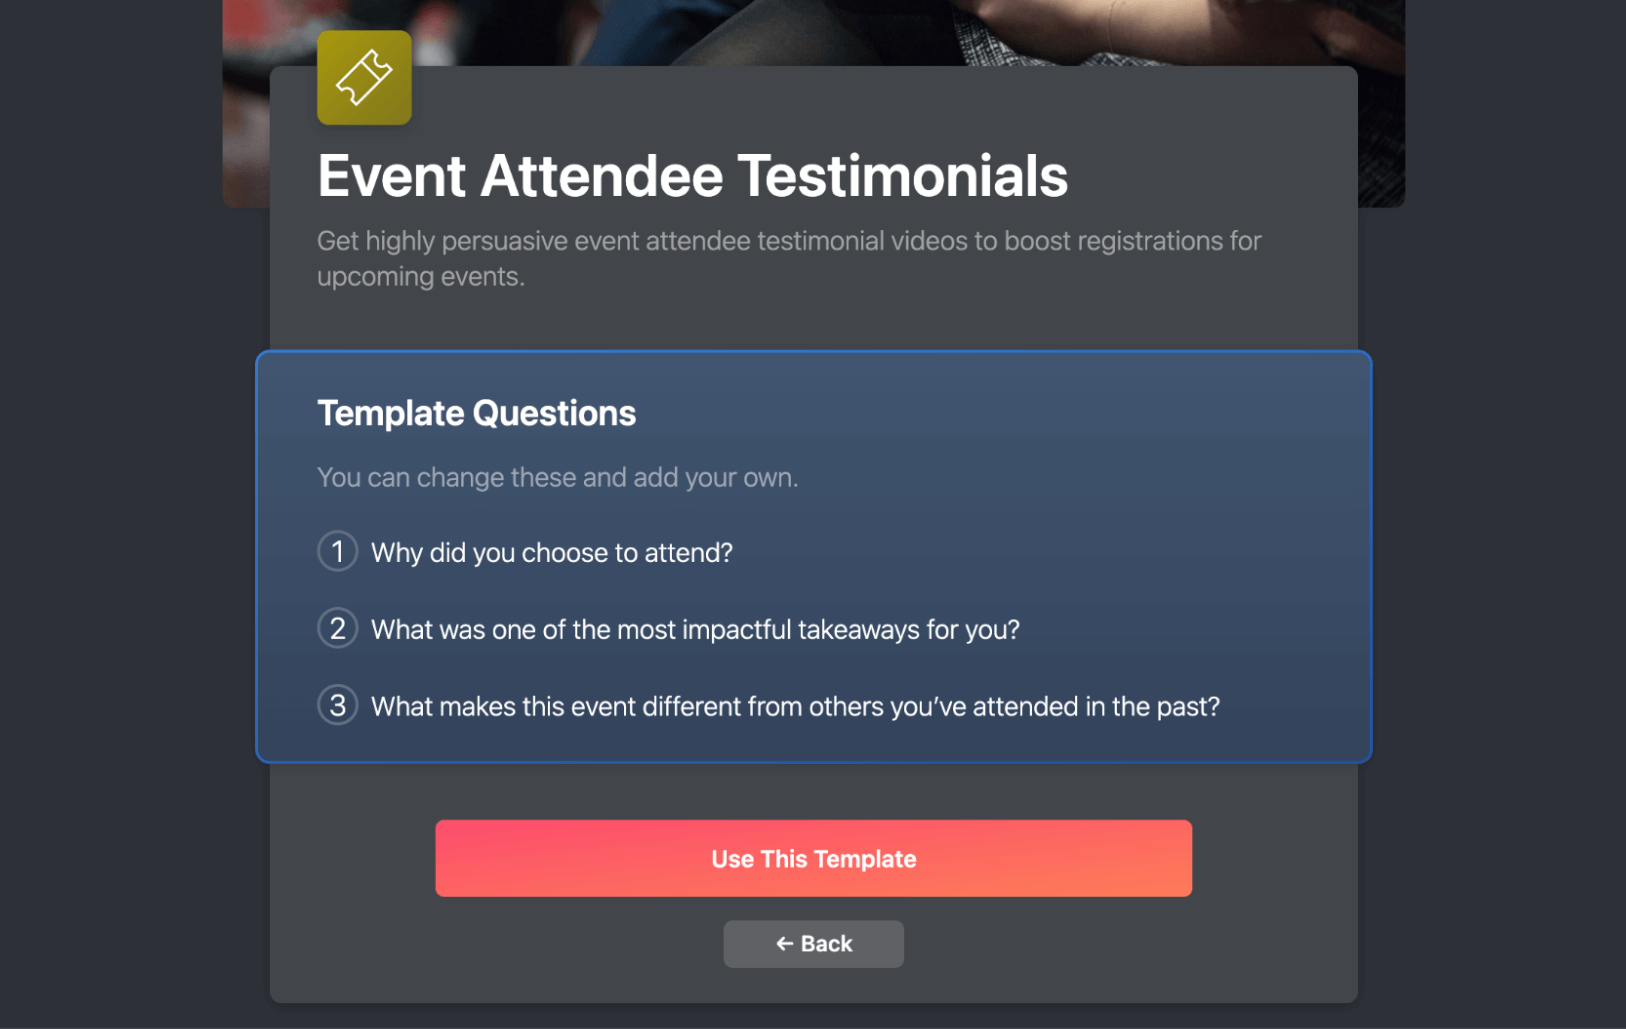 Event Attendee Testimonials | Template Questions: Why did you choose to attend? What was one of the most impactful takeaways for you? What makes this event different from others you've attended in the past?